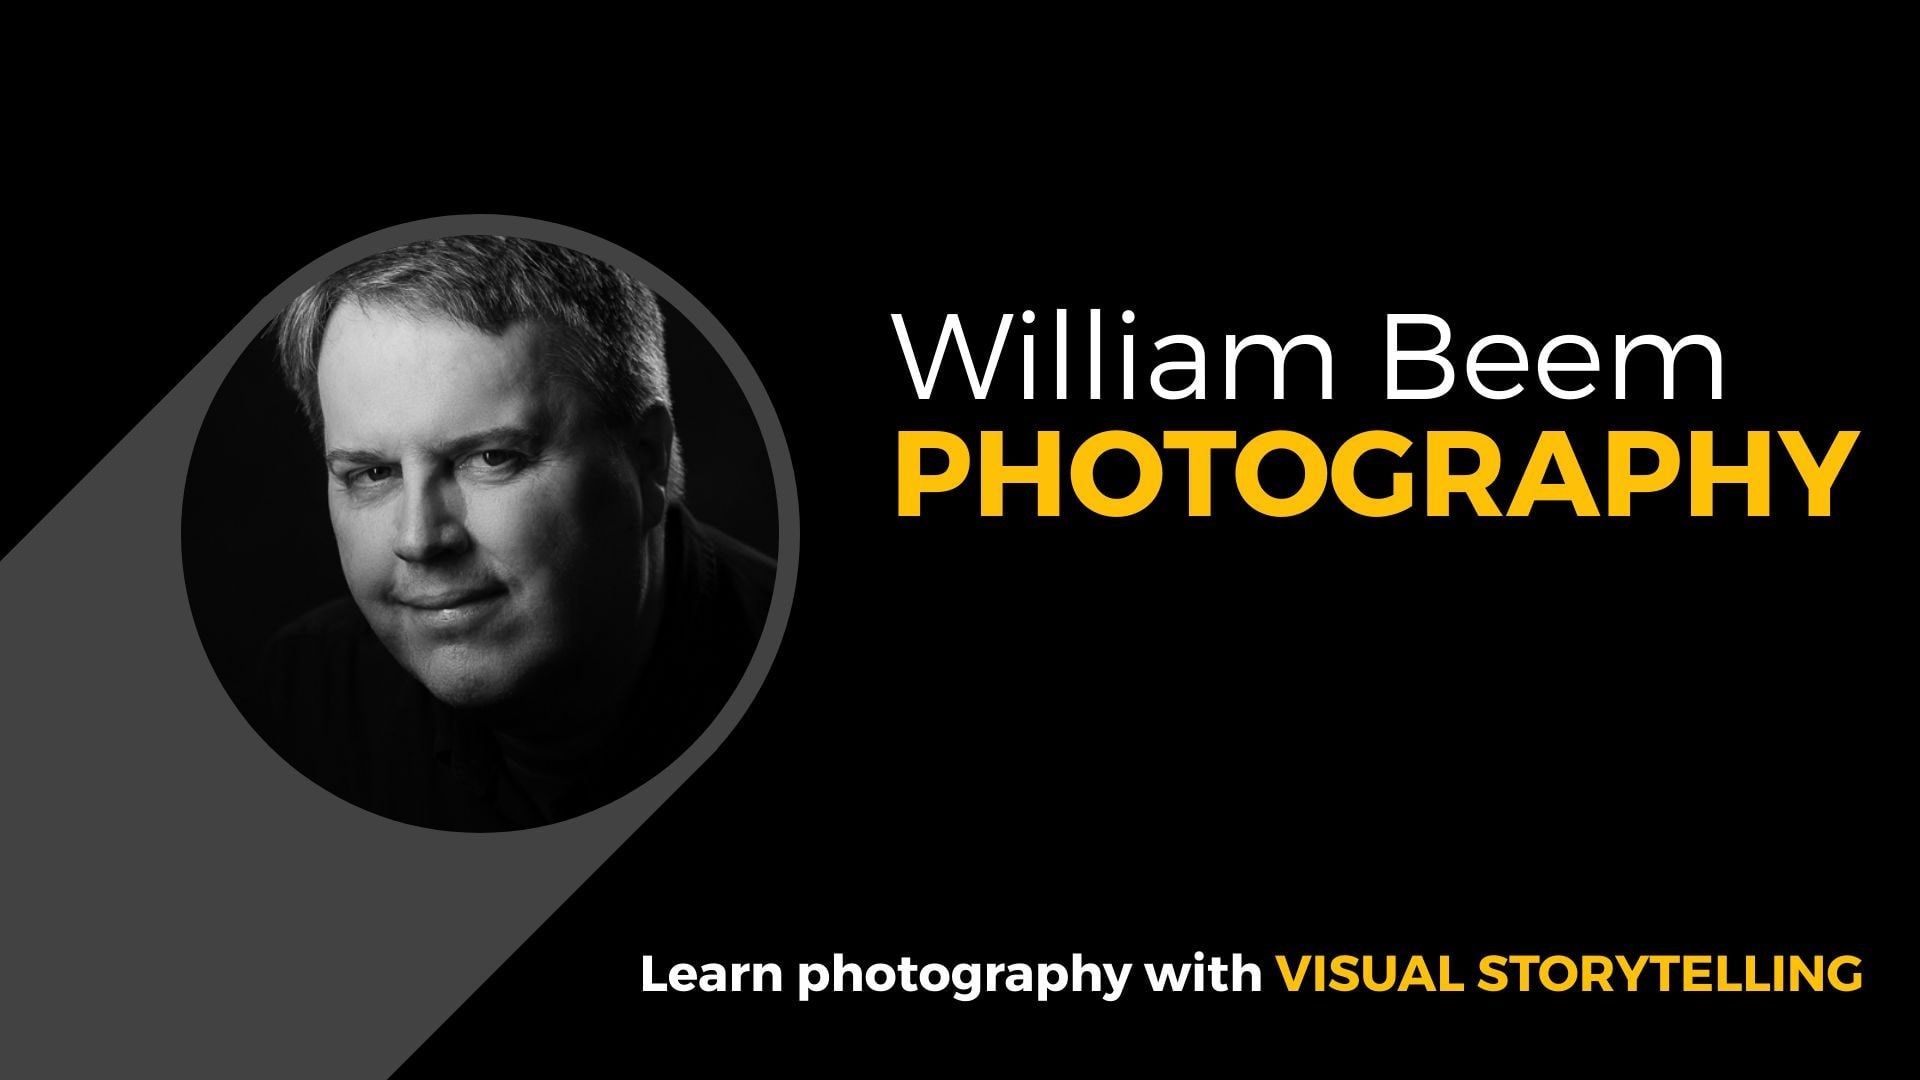 William Beem Photography and Visual Storytelling